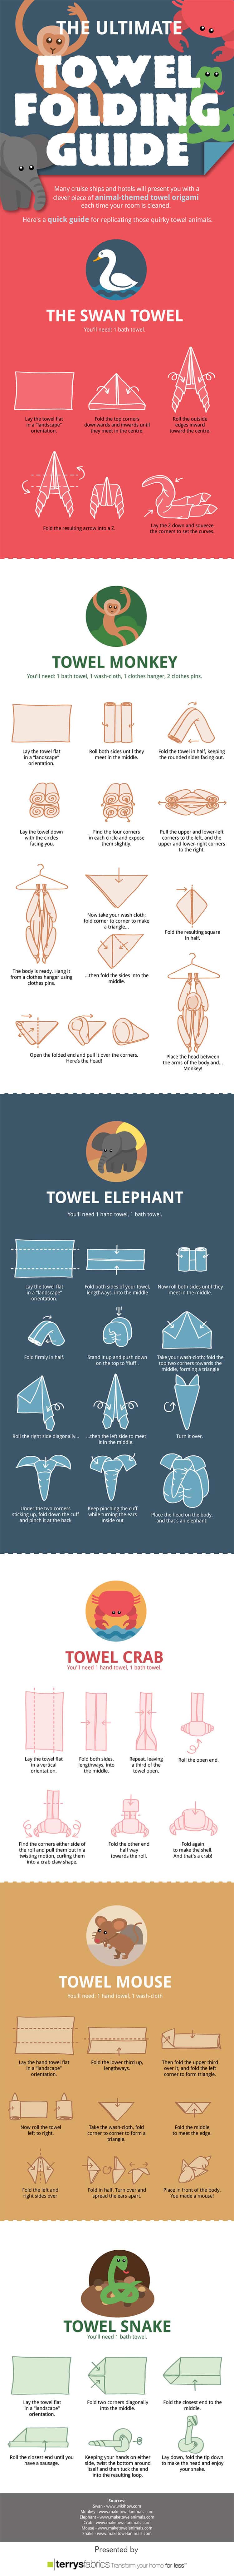 6 Awesome Animal Shaped Towels And How To Make Them